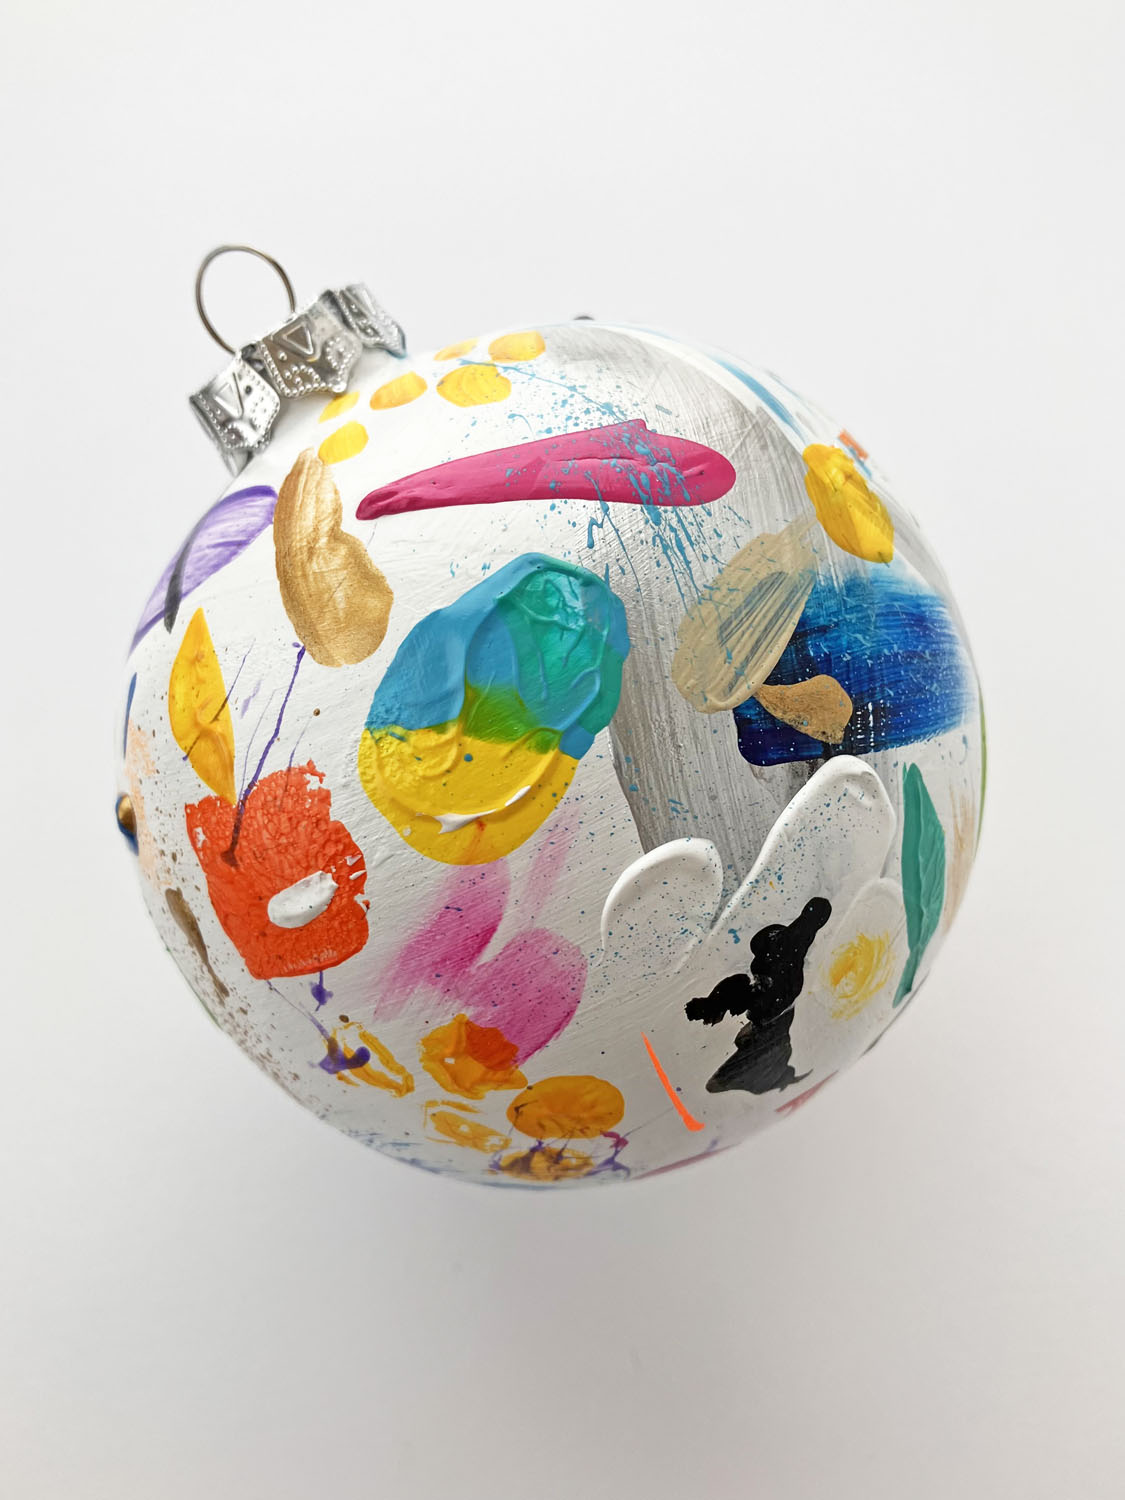 Hand Painted Ceramic Ornament #3 - Multicolor Abstract, White Round Ornament